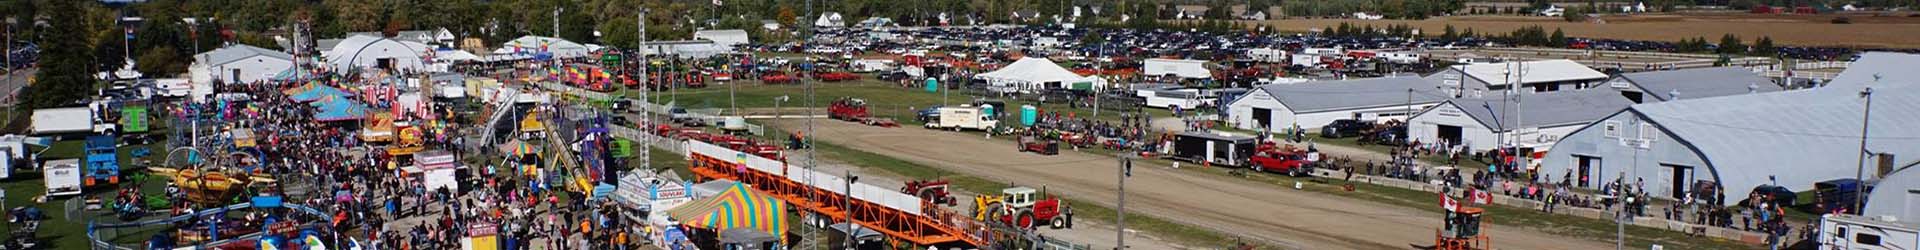 2022 Fair Exhibitor Entry Deadline (Without Late Fees)